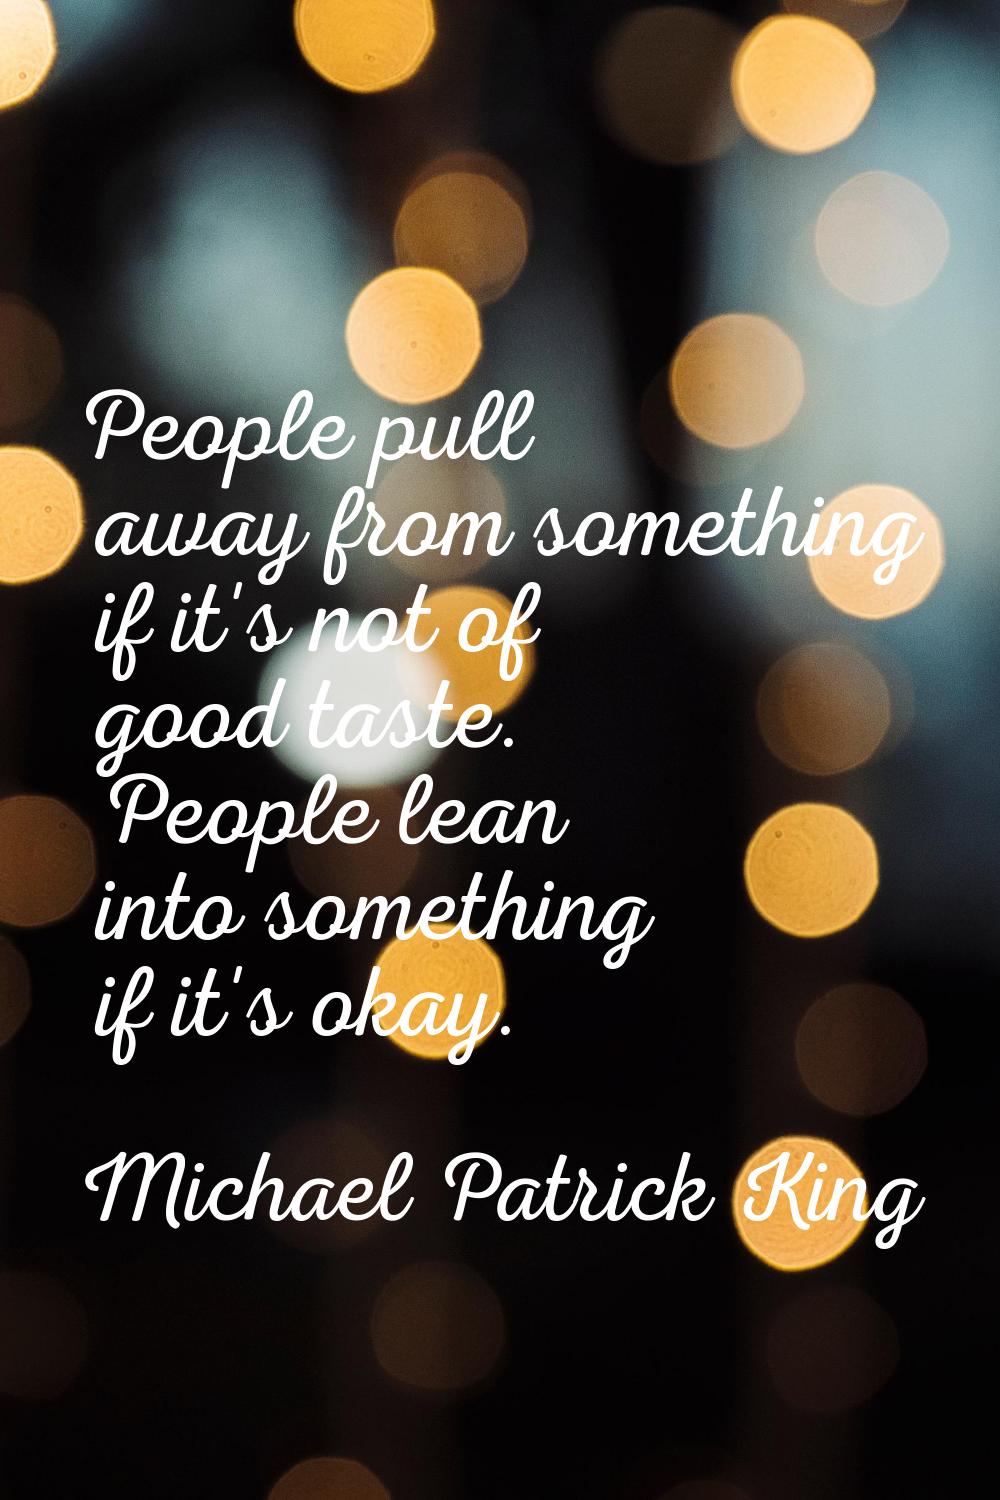 People pull away from something if it's not of good taste. People lean into something if it's okay.